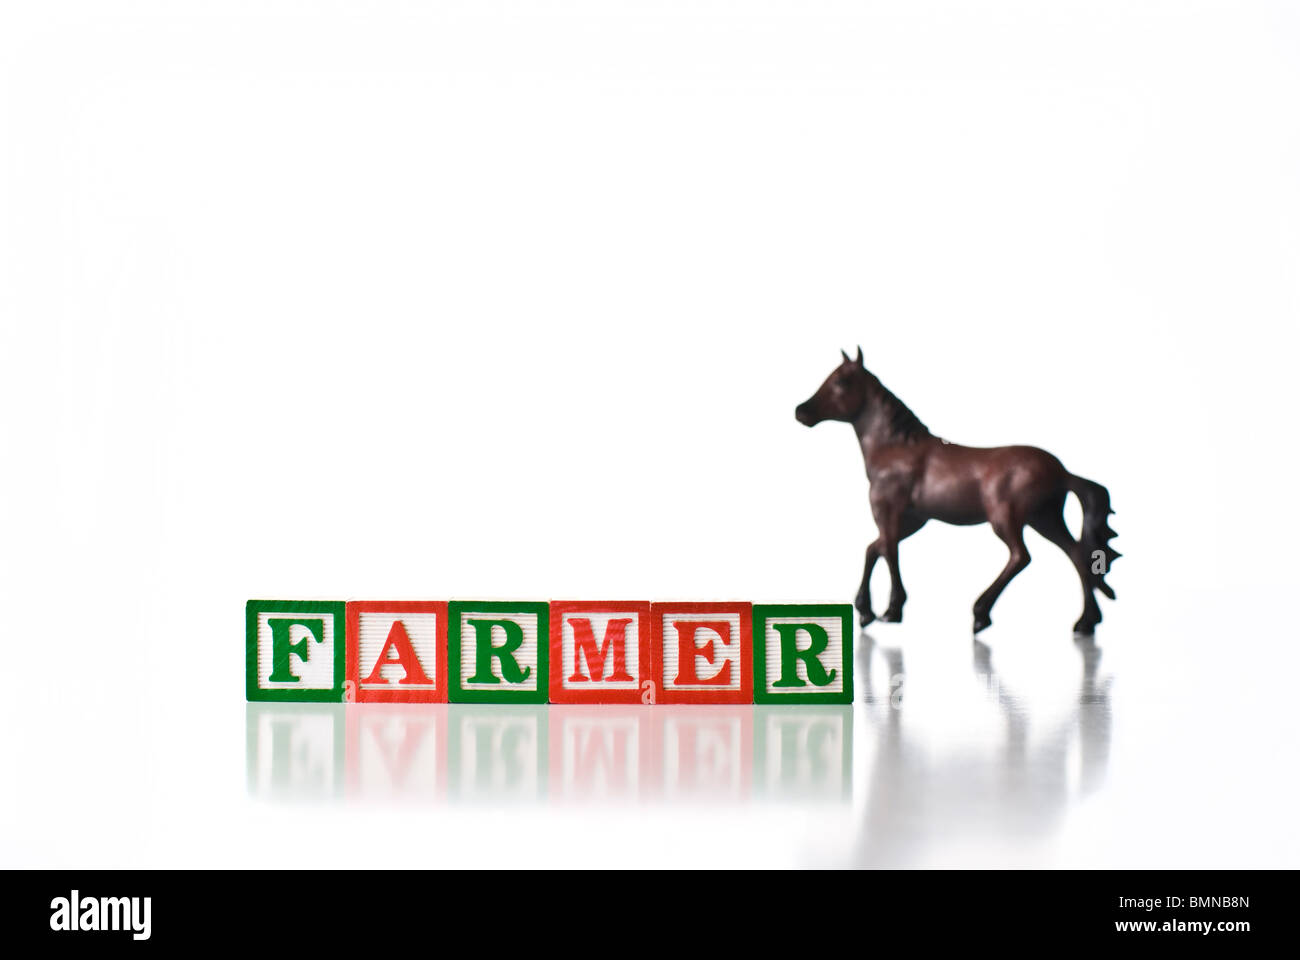 Colorful children's blocks spelling FARMER with a horse Stock Photo